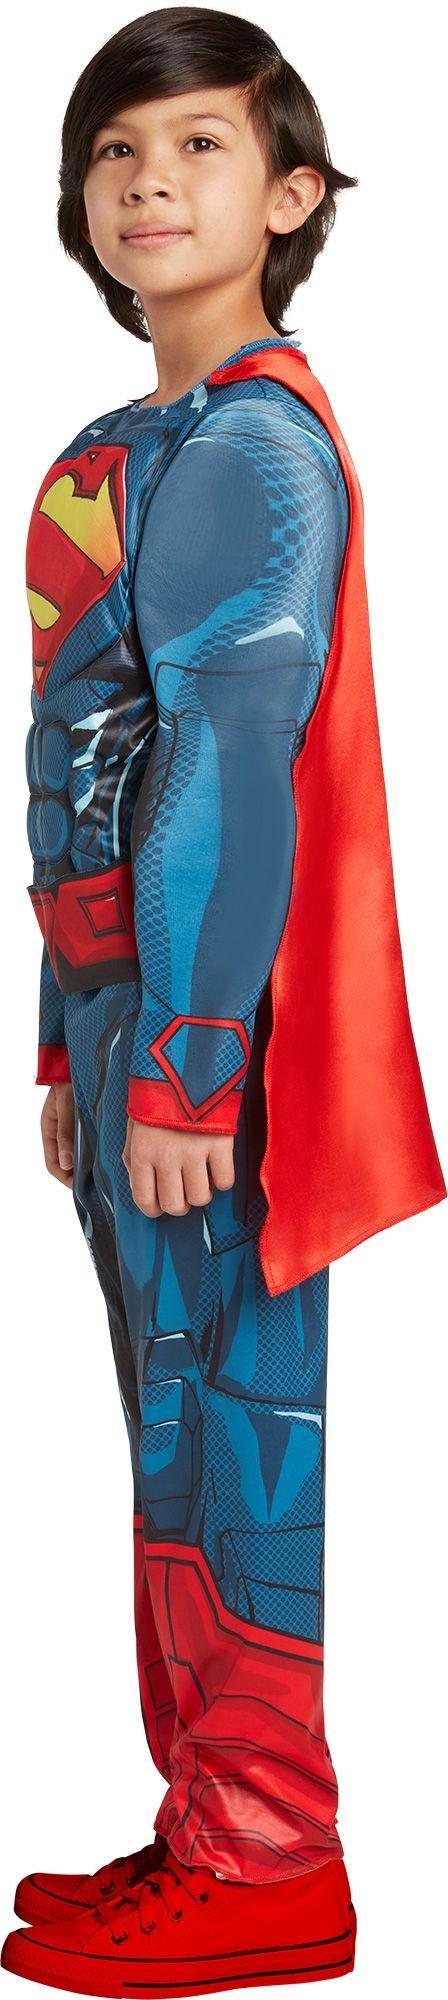 Superman Muscle Costume for Kids - Justice League